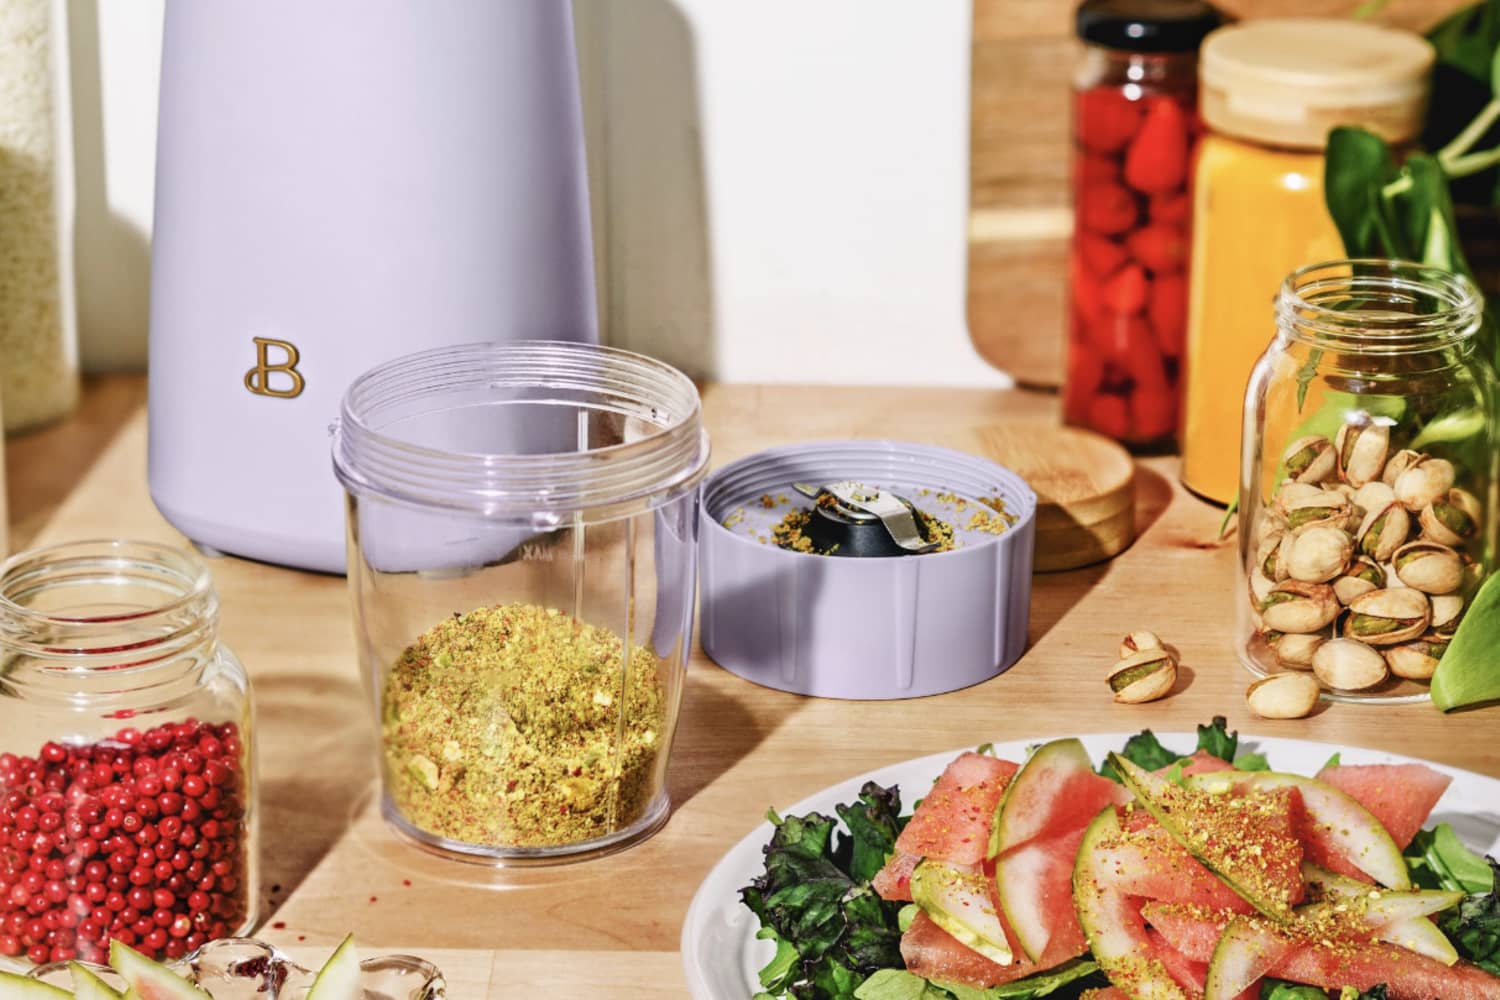 Drew Barrymore's Beautiful Kitchen Collection Has Exciting New Additions